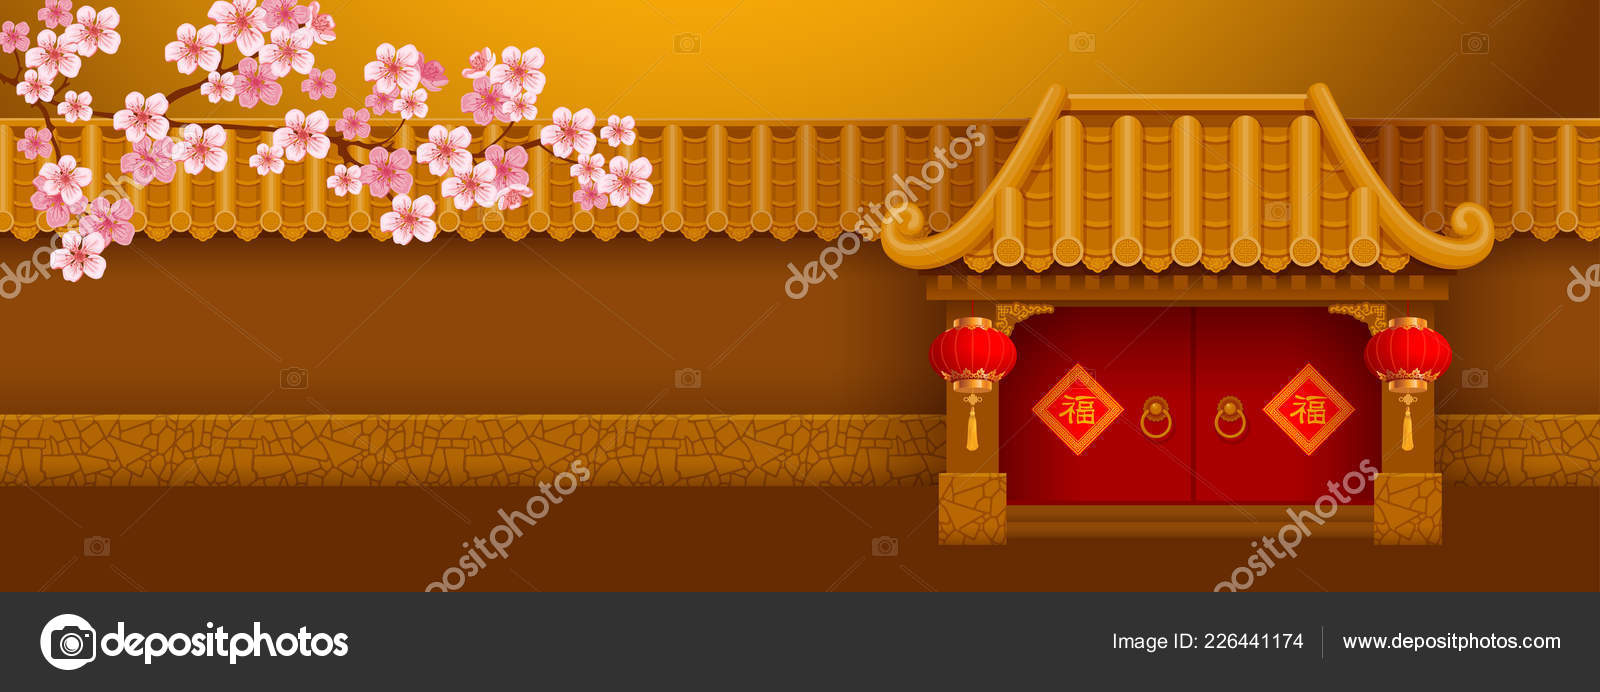 Chinese New Year Banner Template Wall Entrance Bamboo Roof Chinese Intended For Good Luck Banner Template